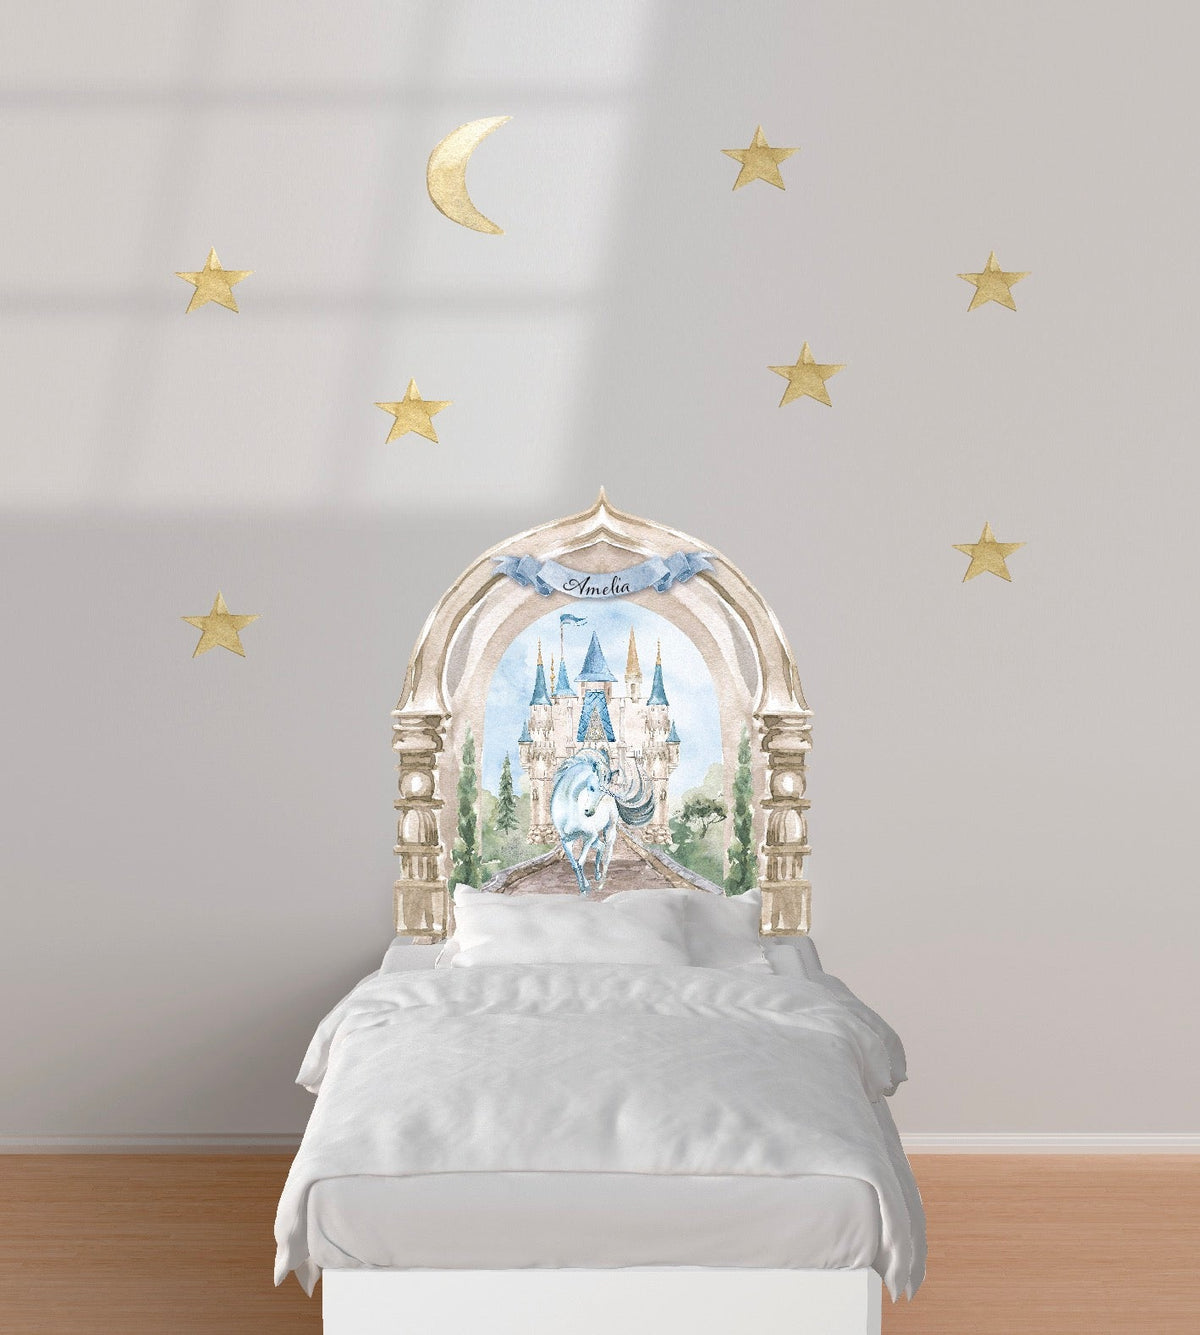 A child's bedroom with a Cover-Alls Enchanted Castle with Unicorn Decal above the bed depicting an enchanted castle, bordered by stars and a crescent moon.